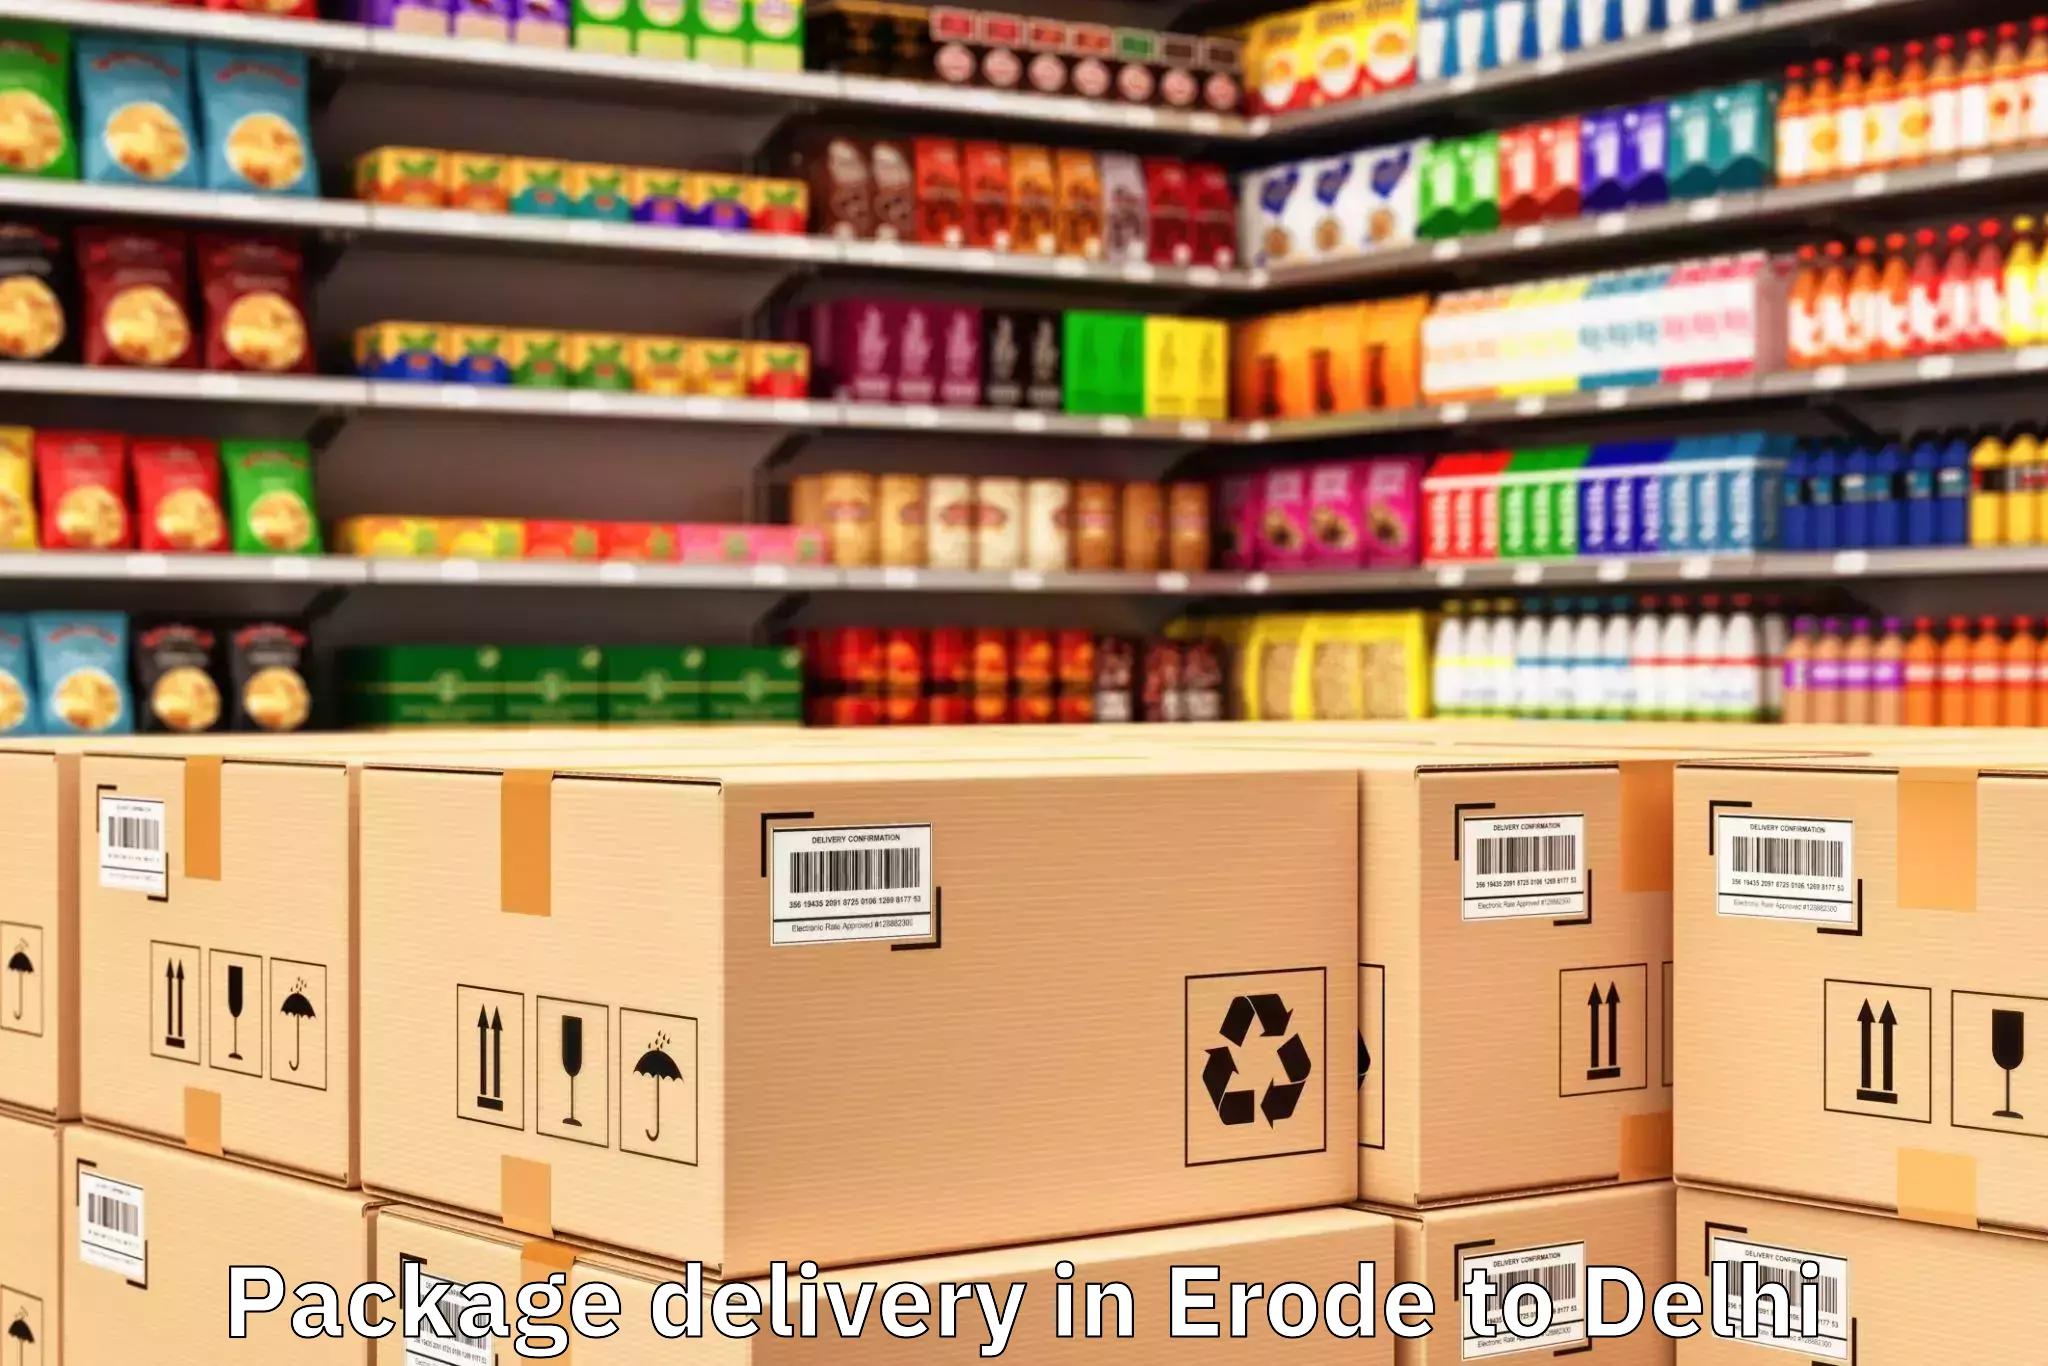 Erode to Unity One Mall Janakpuri Package Delivery Booking